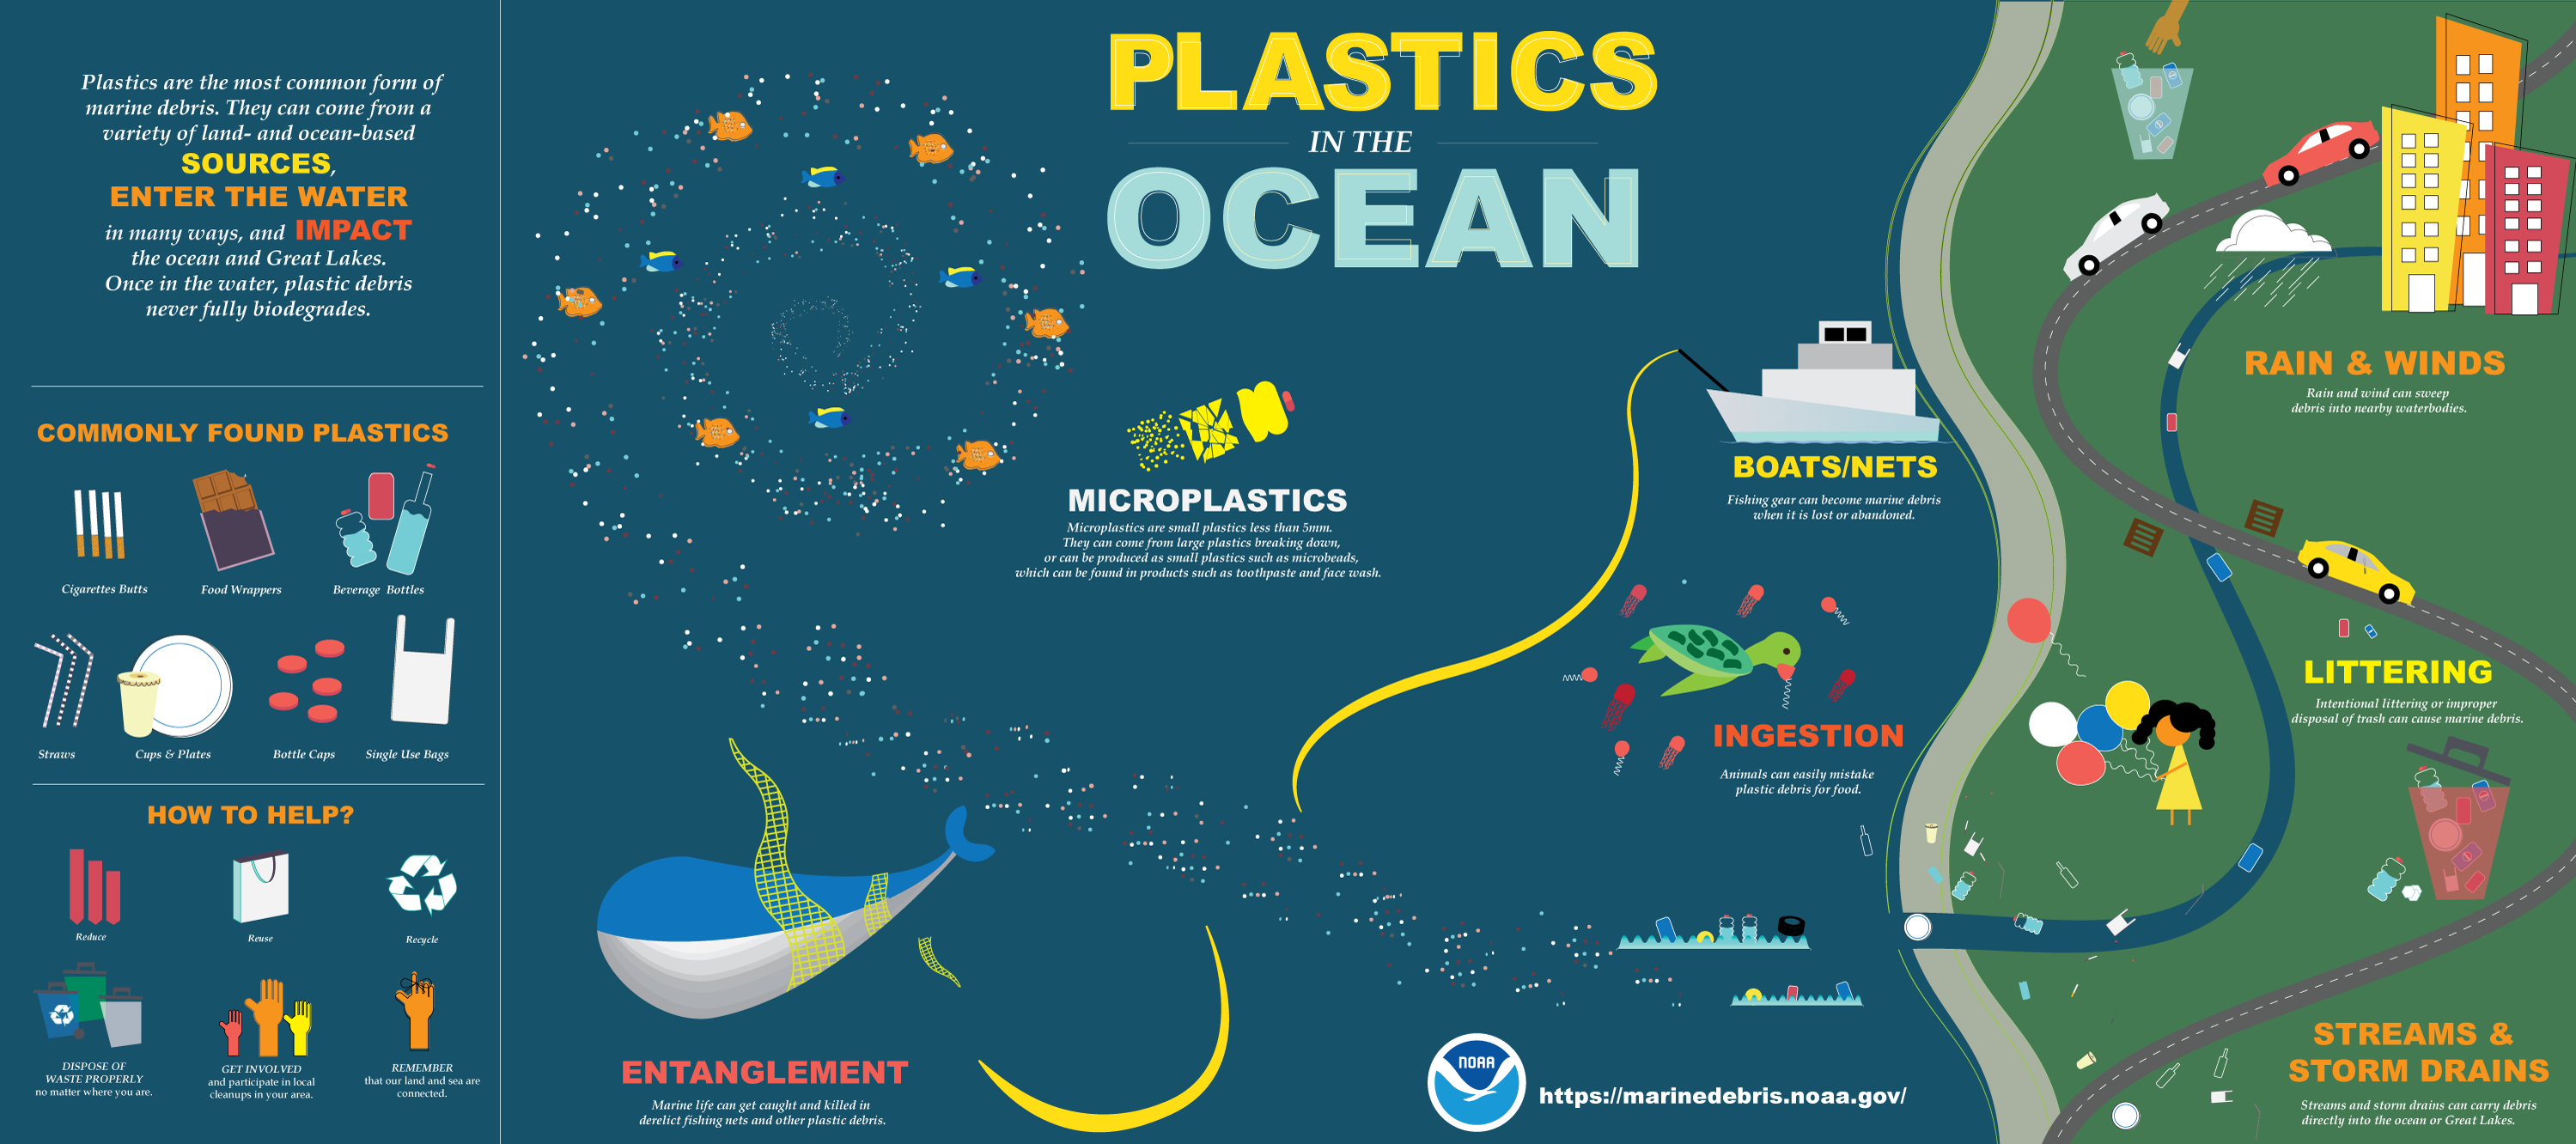 Plastics are the most common form of marine debris. They can come from a variety of land- and ocean-based sources, enter the water in many ways, and impact the ocean and Great Lakes. Once in the water, plastic debris never fully biodegrades (illustration courtesy of NOAA).